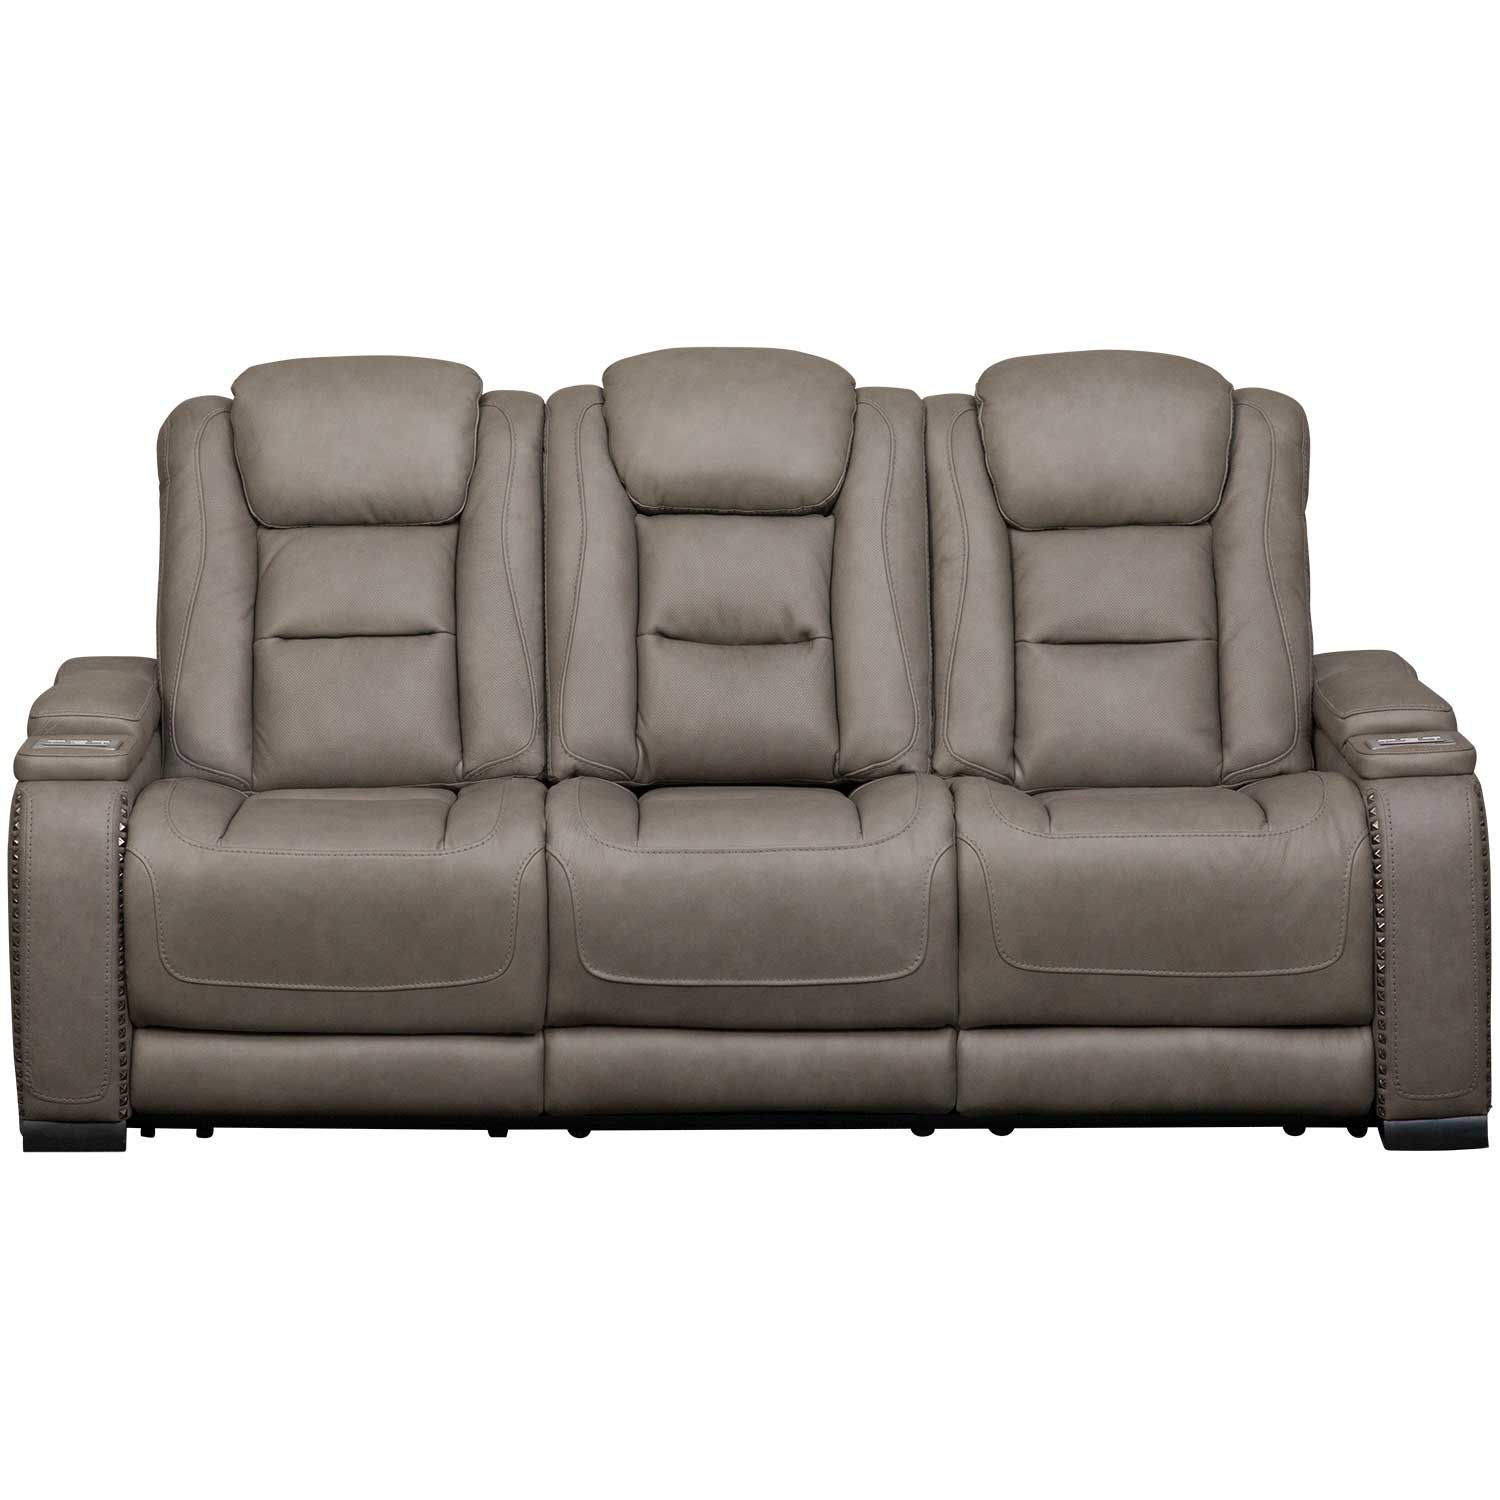 The Man Den Power Reclining Sofa U8530515 Ashley Furniture Afw Com,What To Wear At A Funeral Male